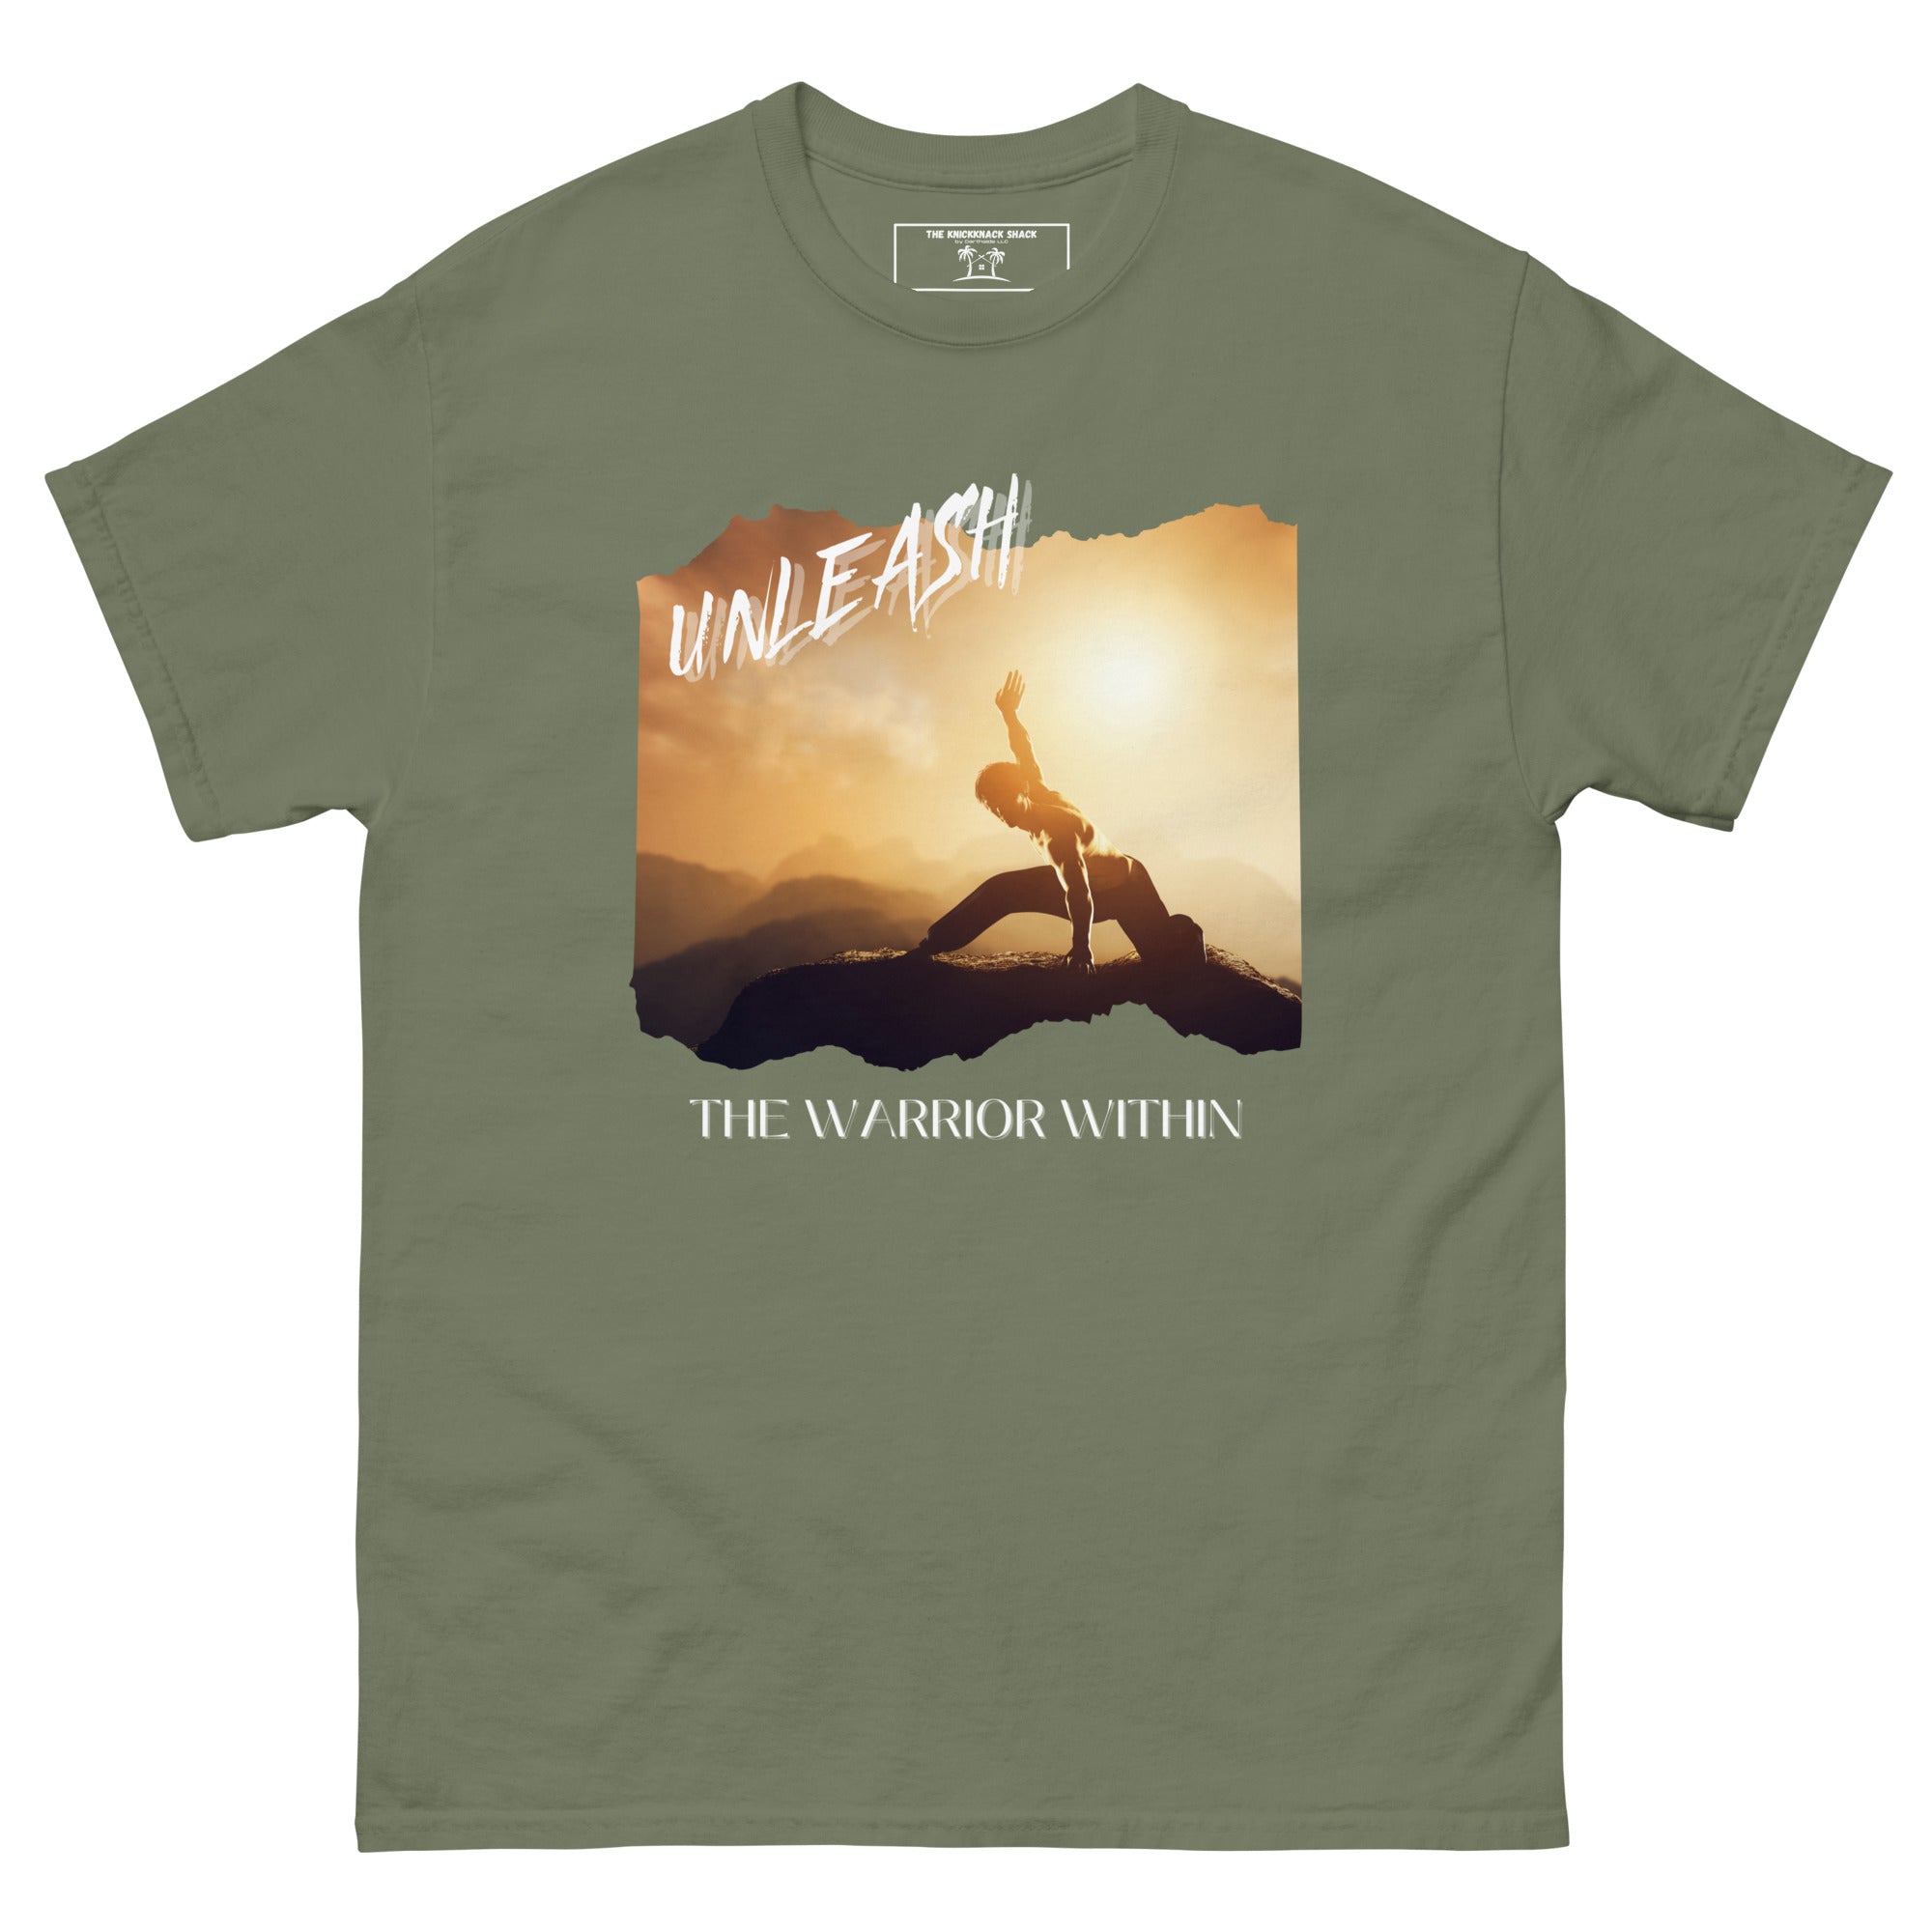 Tee-shirt classique - Warrior Within 1 (couleurs sombres)